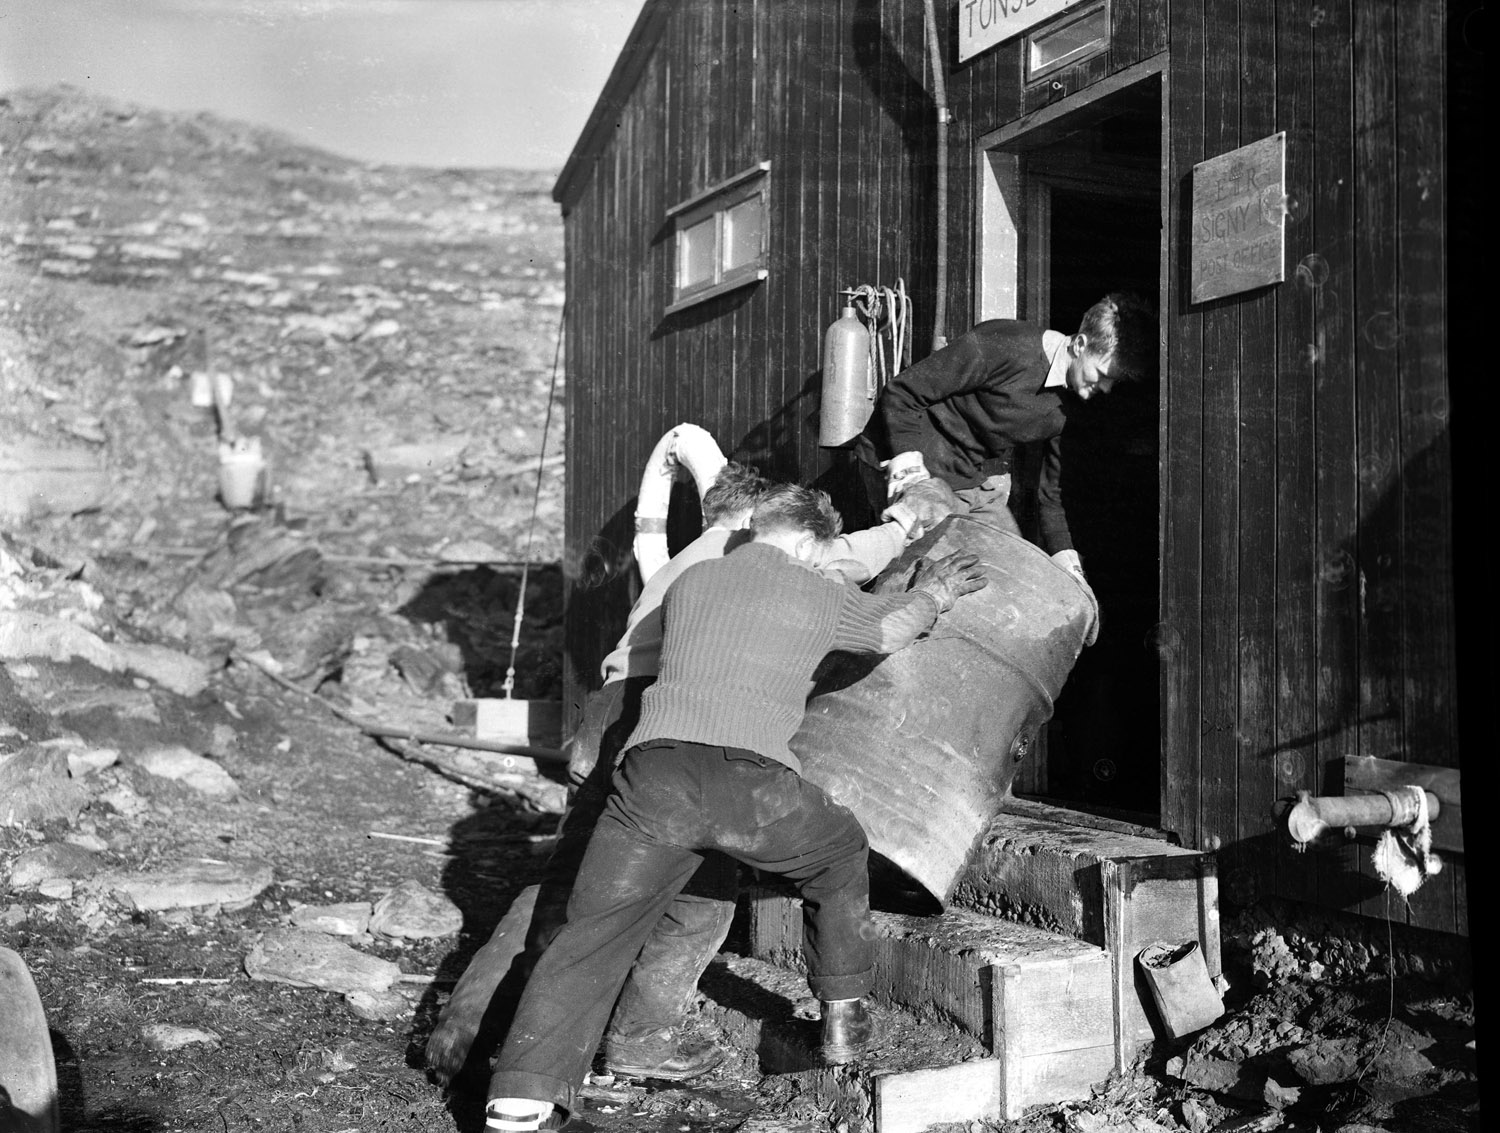 Diesel oil for the generator taking the usual route into the hut 1958-59